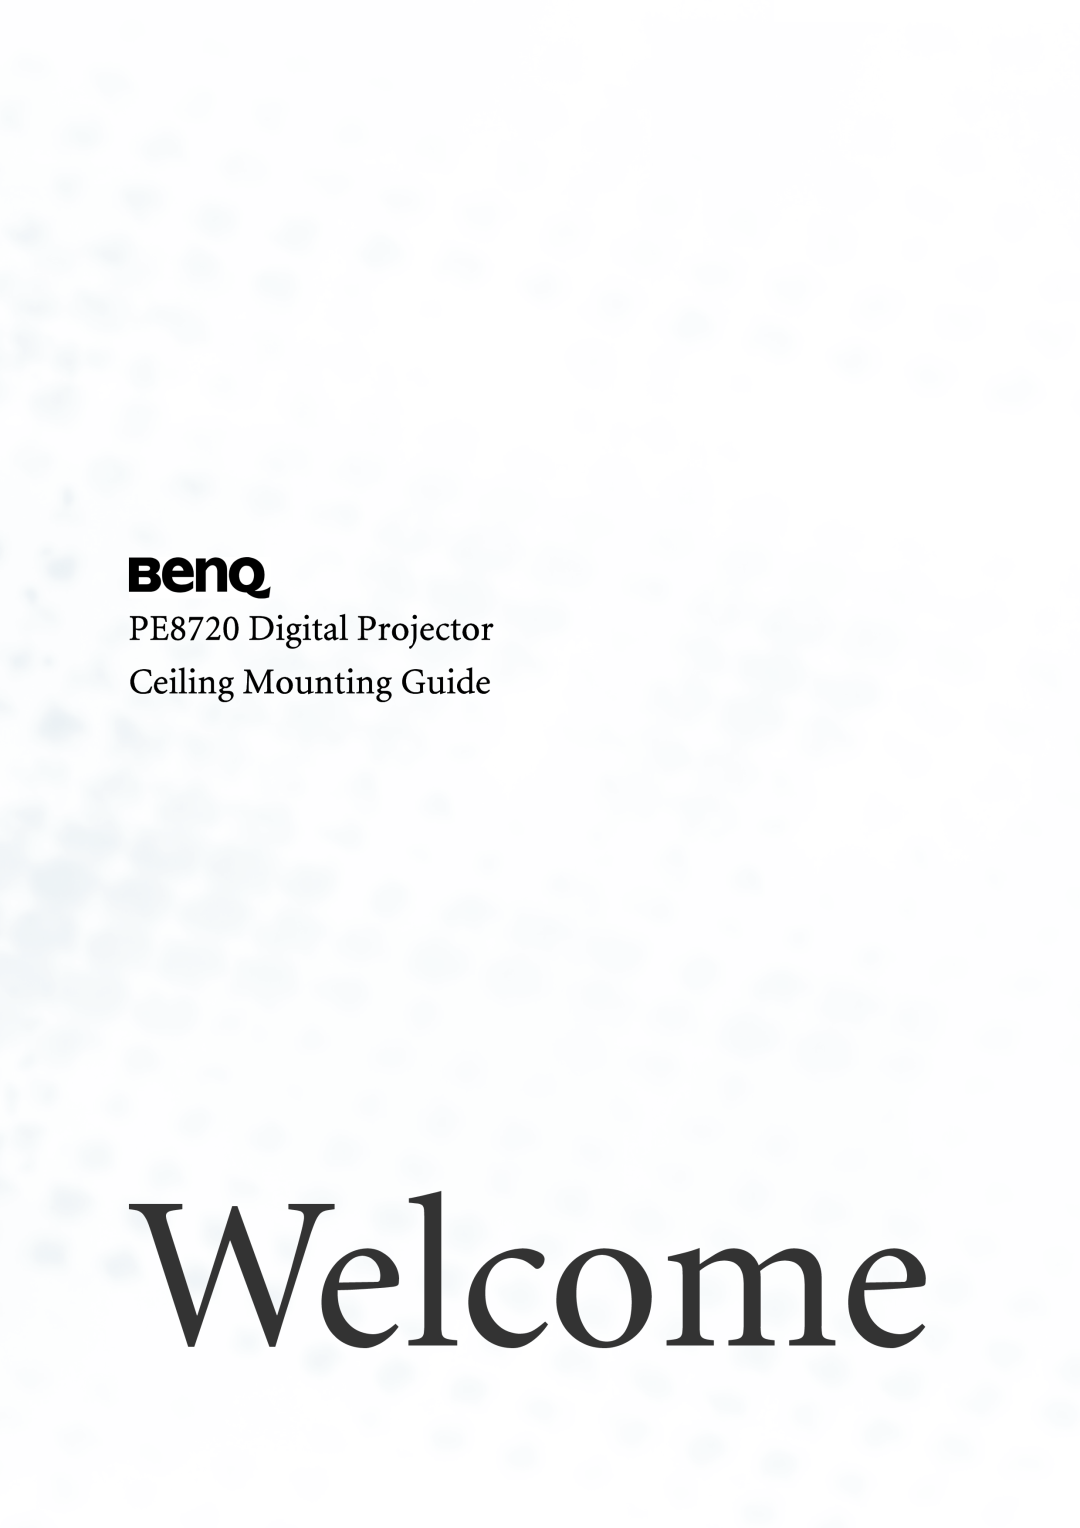 BenQ manual PE8720 Digital Projector Ceiling Mounting Guide, Welcome 